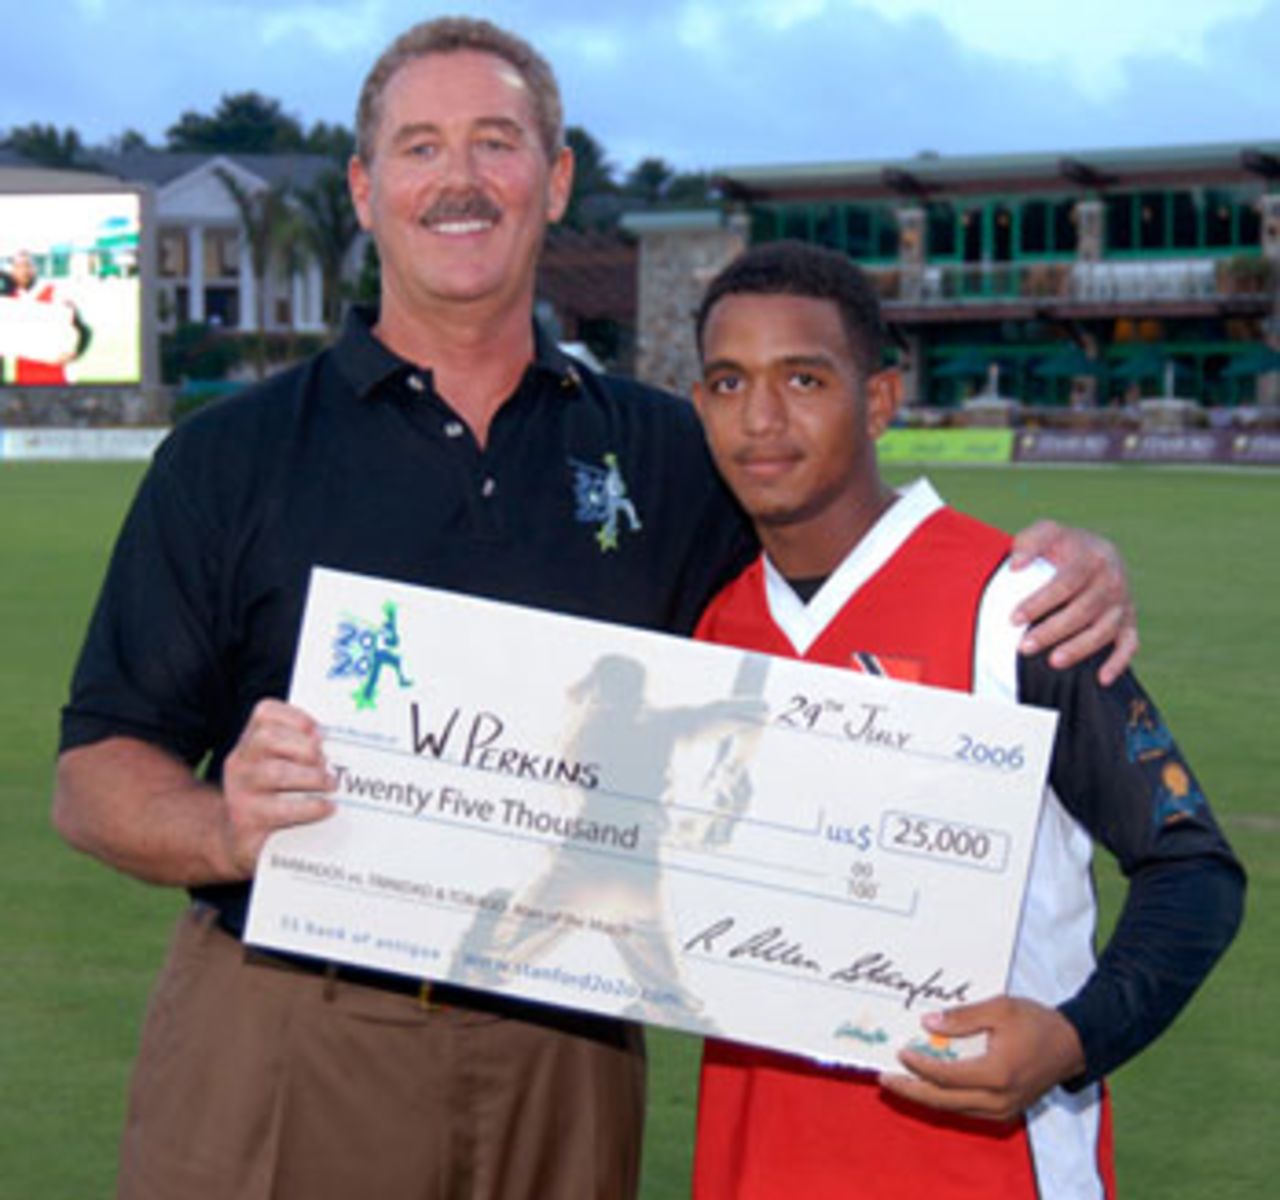 Man of the Match William Perkins collects his $25,000 cheque from Allen Stanford, Trinidad & Tobago v Barbados, Stanford 20/20, July 29, 2006 	